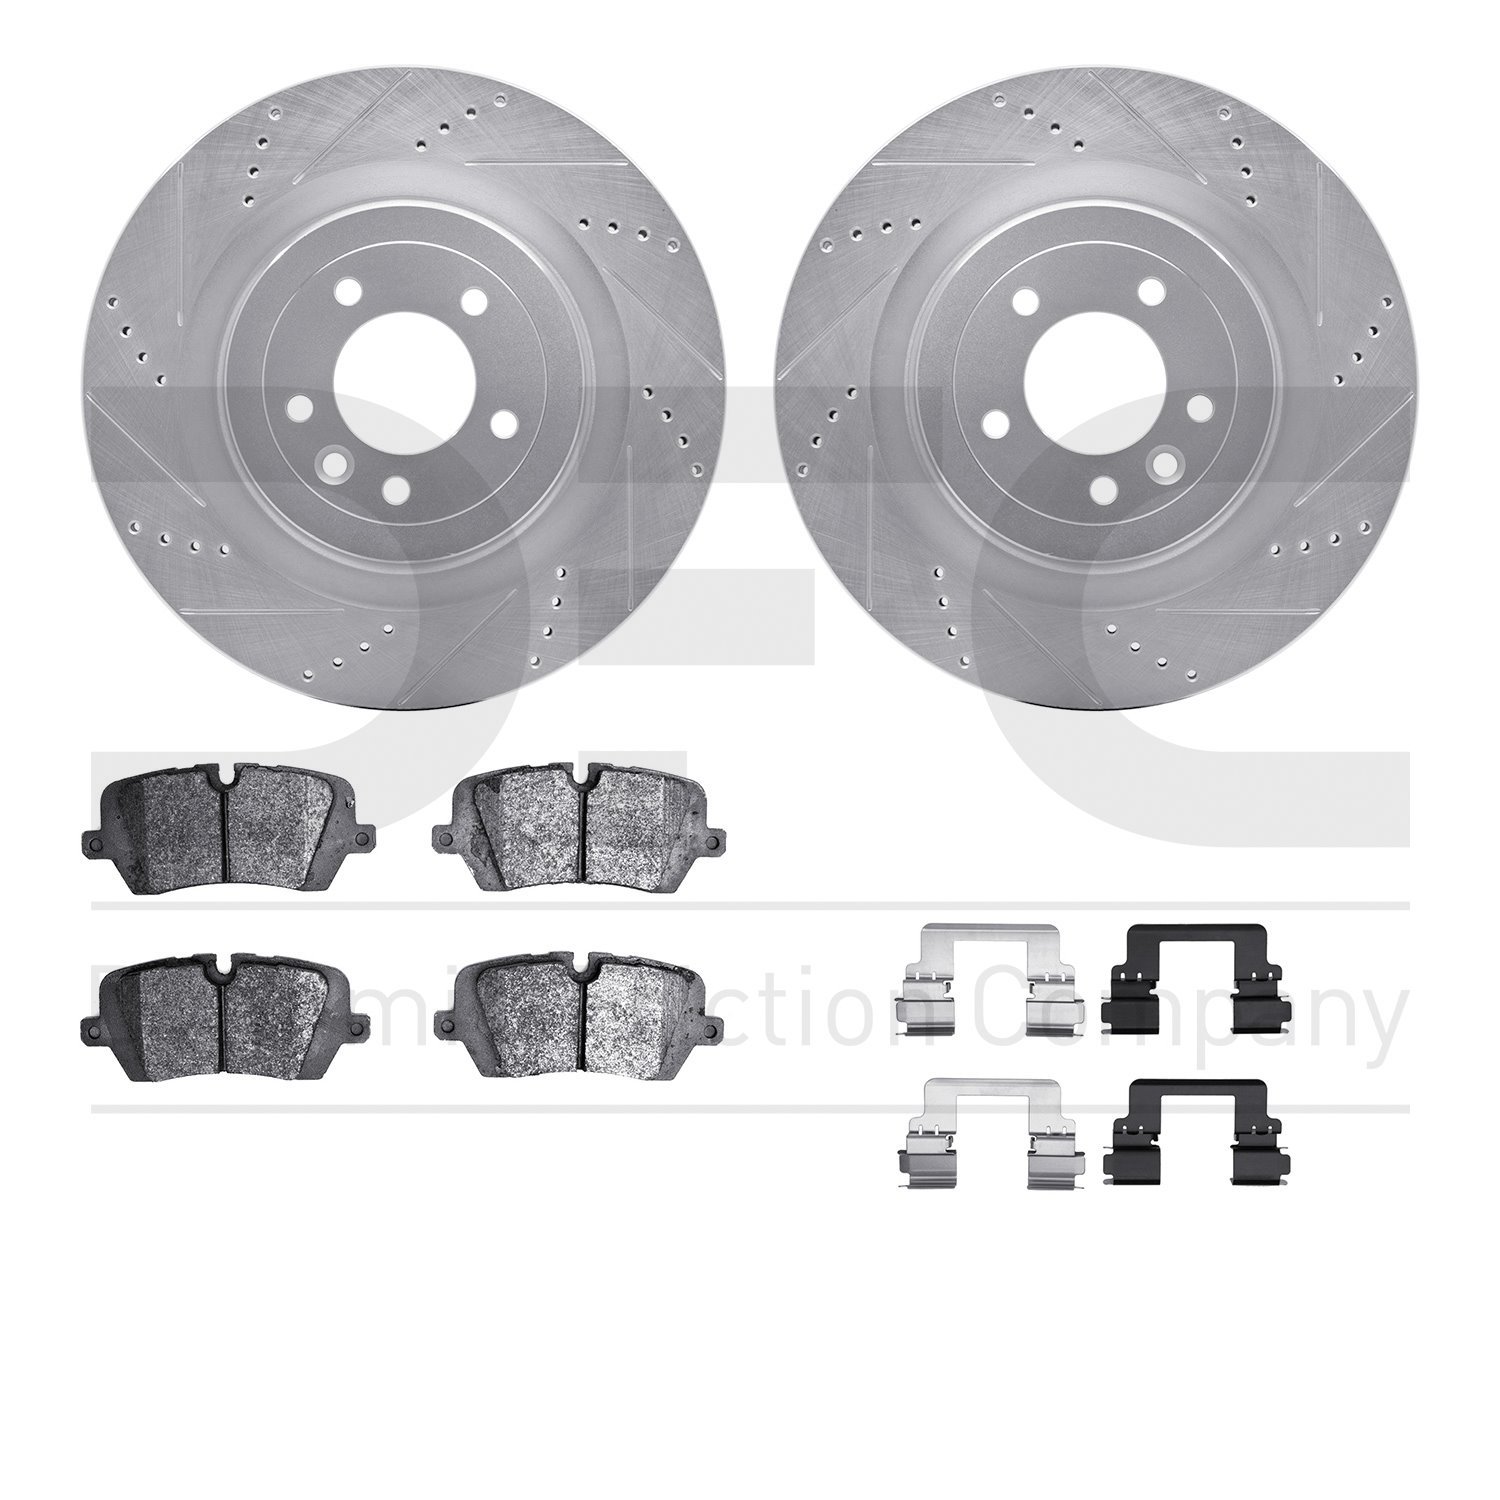 7612-11022 Drilled/Slotted Brake Rotors w/5000 Euro Ceramic Brake Pads Kit & Hardware [Silver], Fits Select Land Rover, Position